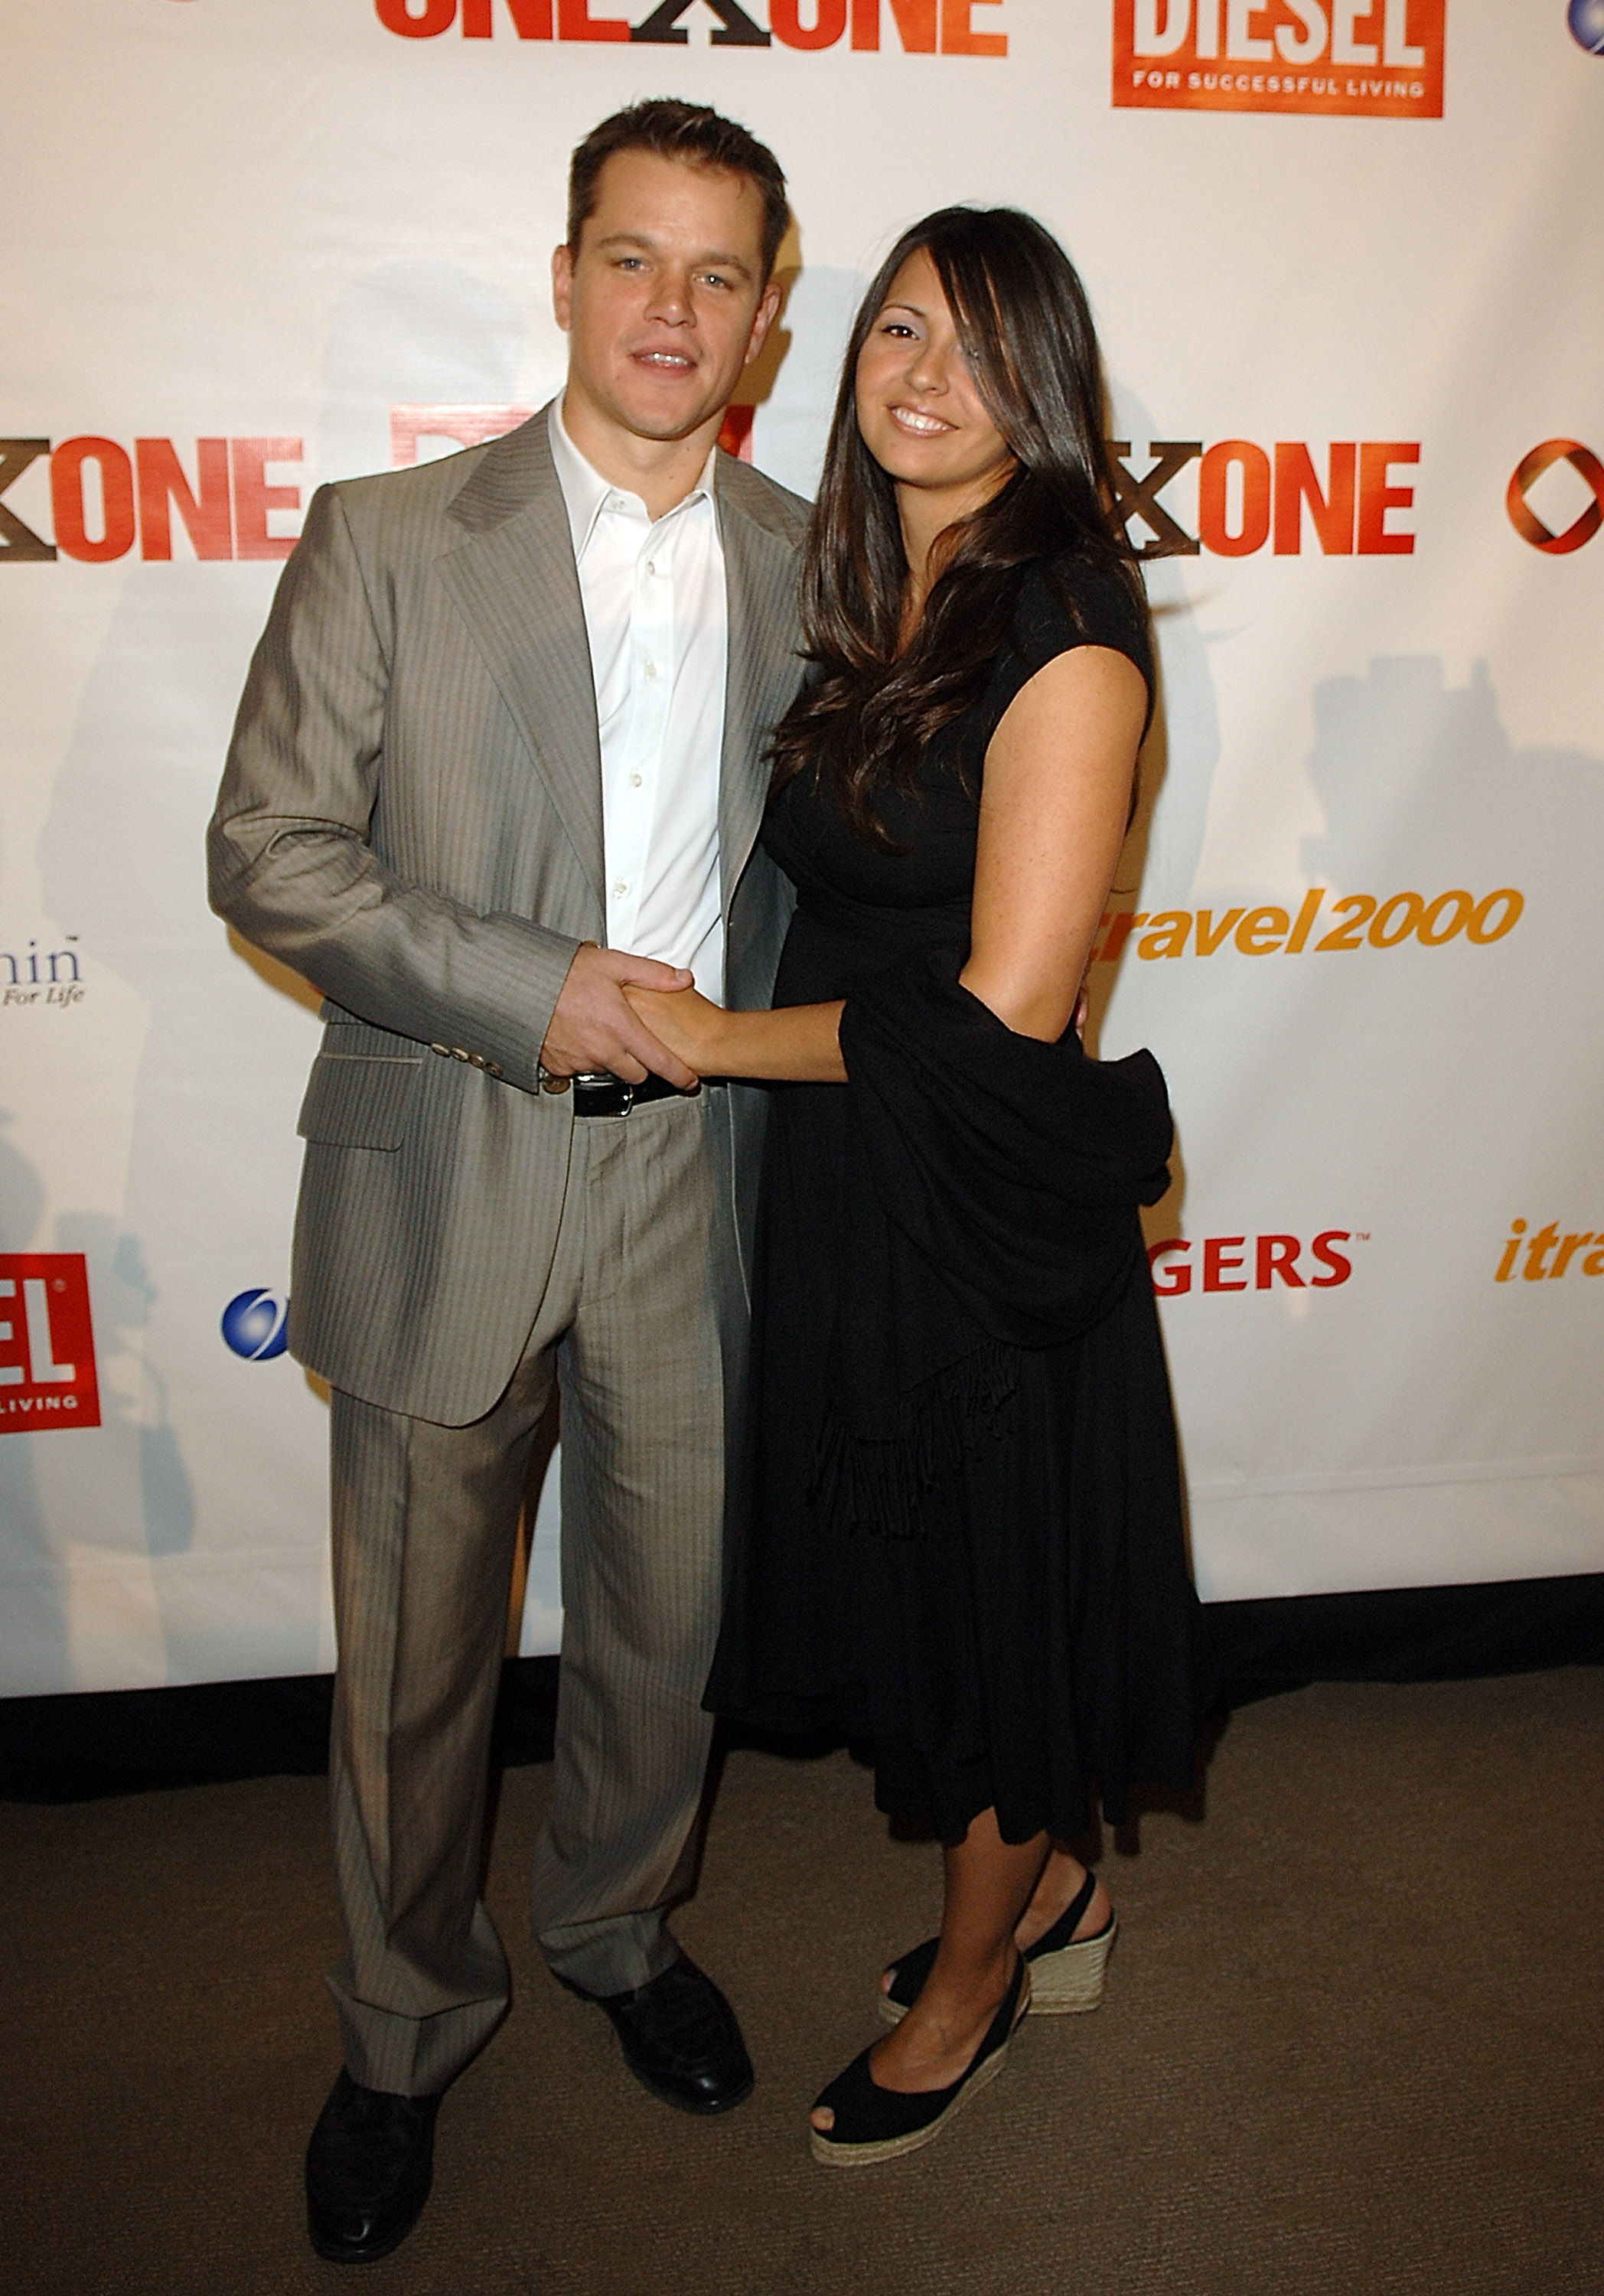 Matt Damon with his wife Luciana Barroso in Toronto, Ontario, Canada. | Source: Getty Images